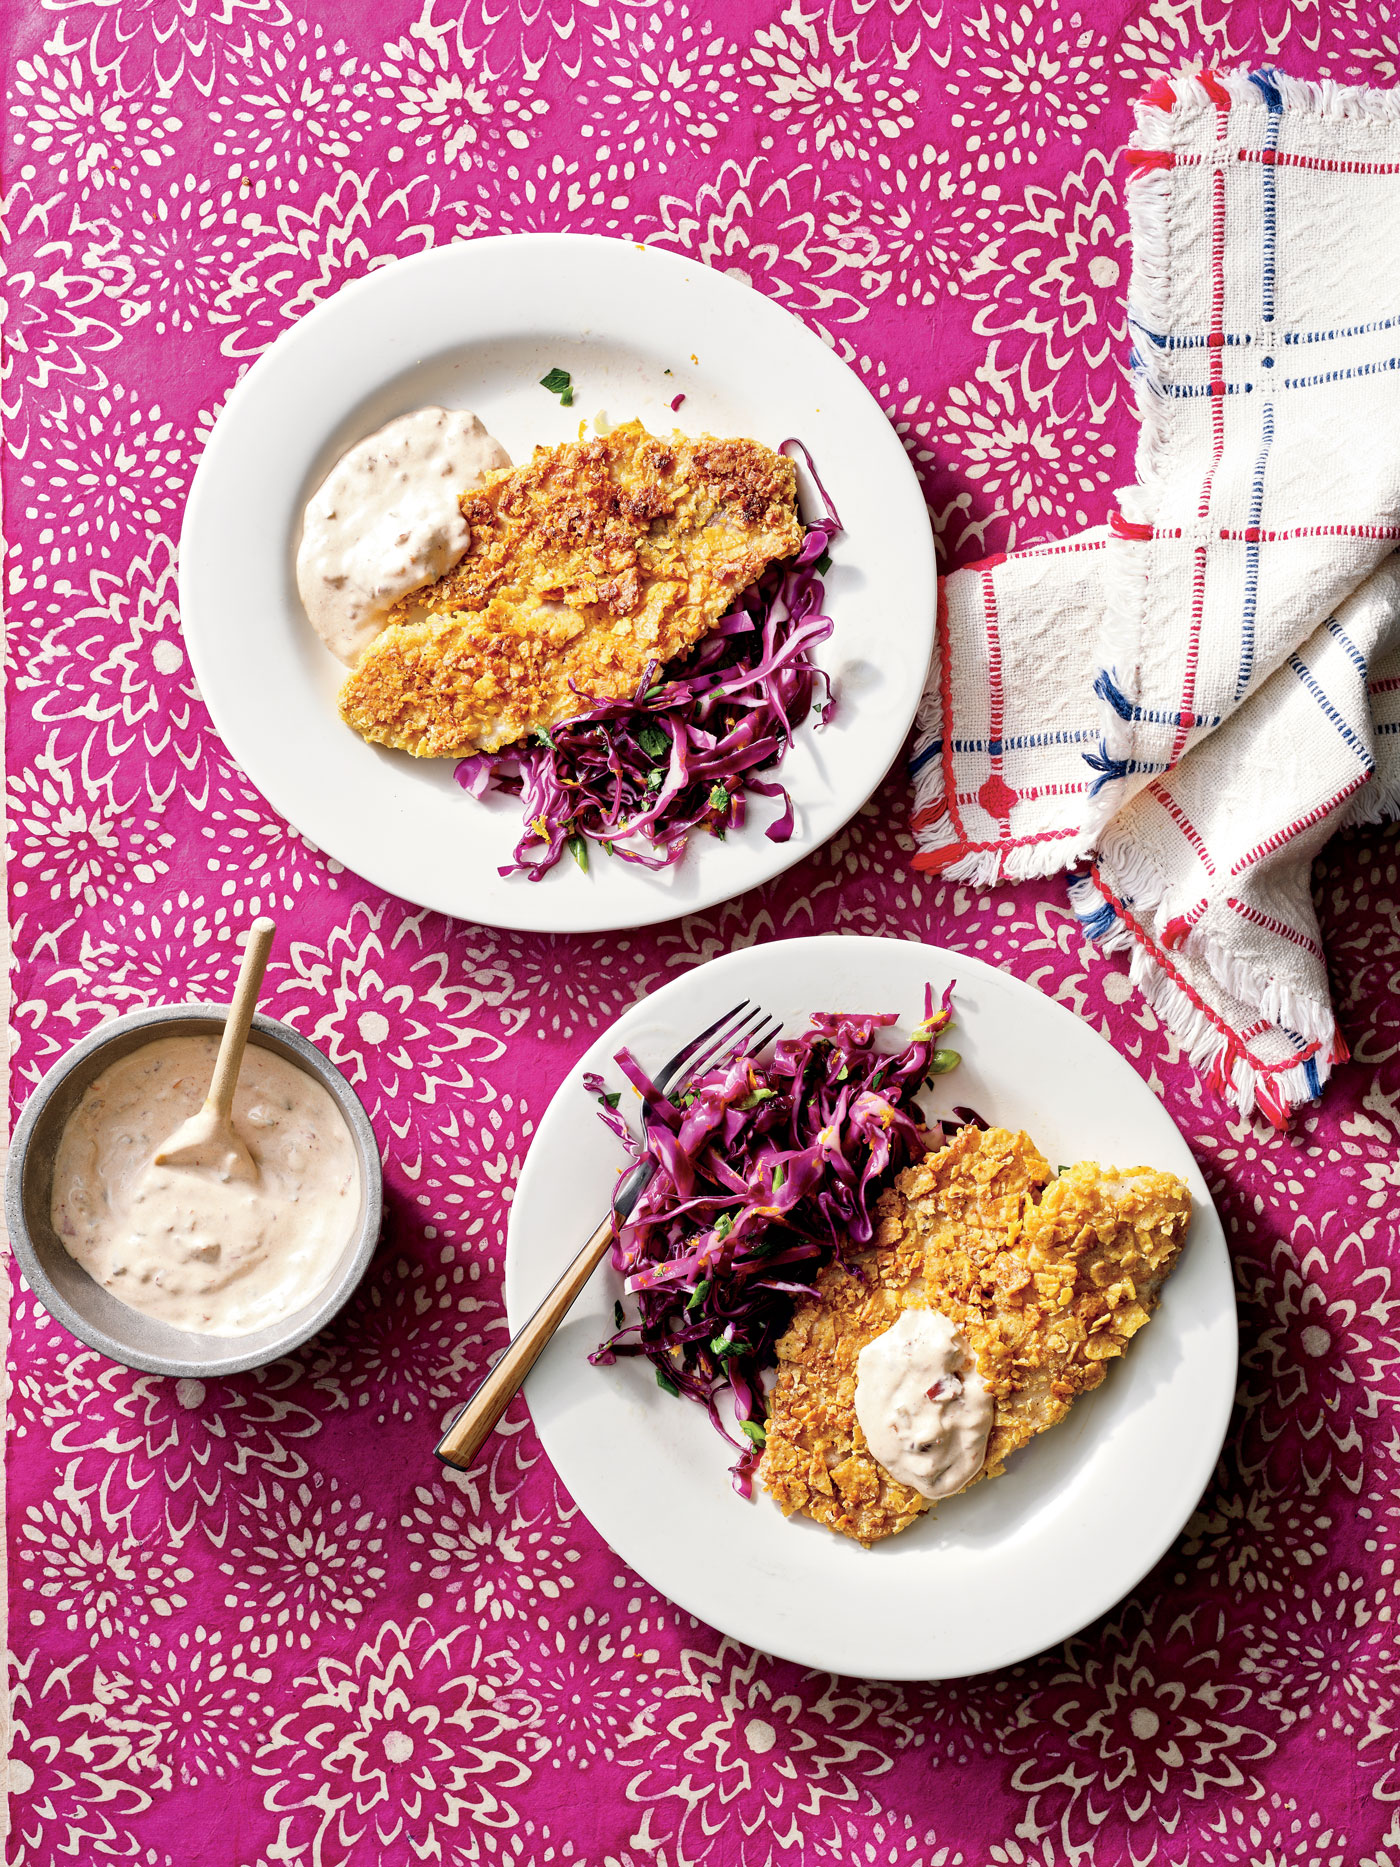 Tortilla-Crusted Tilapia with Citrus Slaw and Chipotle Tartar Sauce